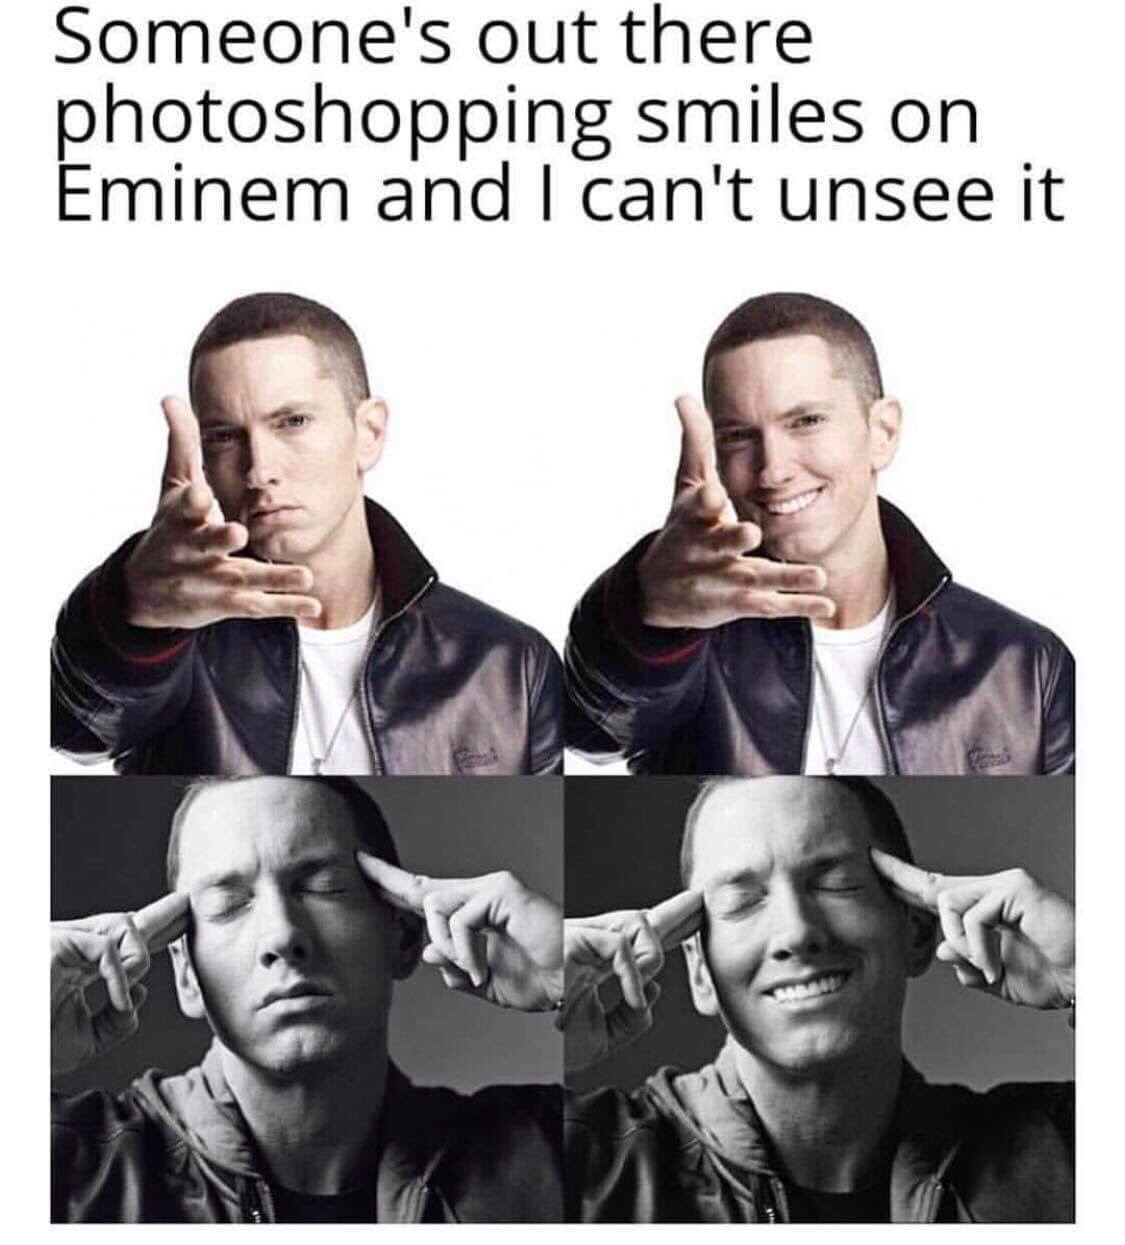 someone is photoshopping smiles on eminem - Someone's out there photoshopping smiles on Eminem and I can't unsee it